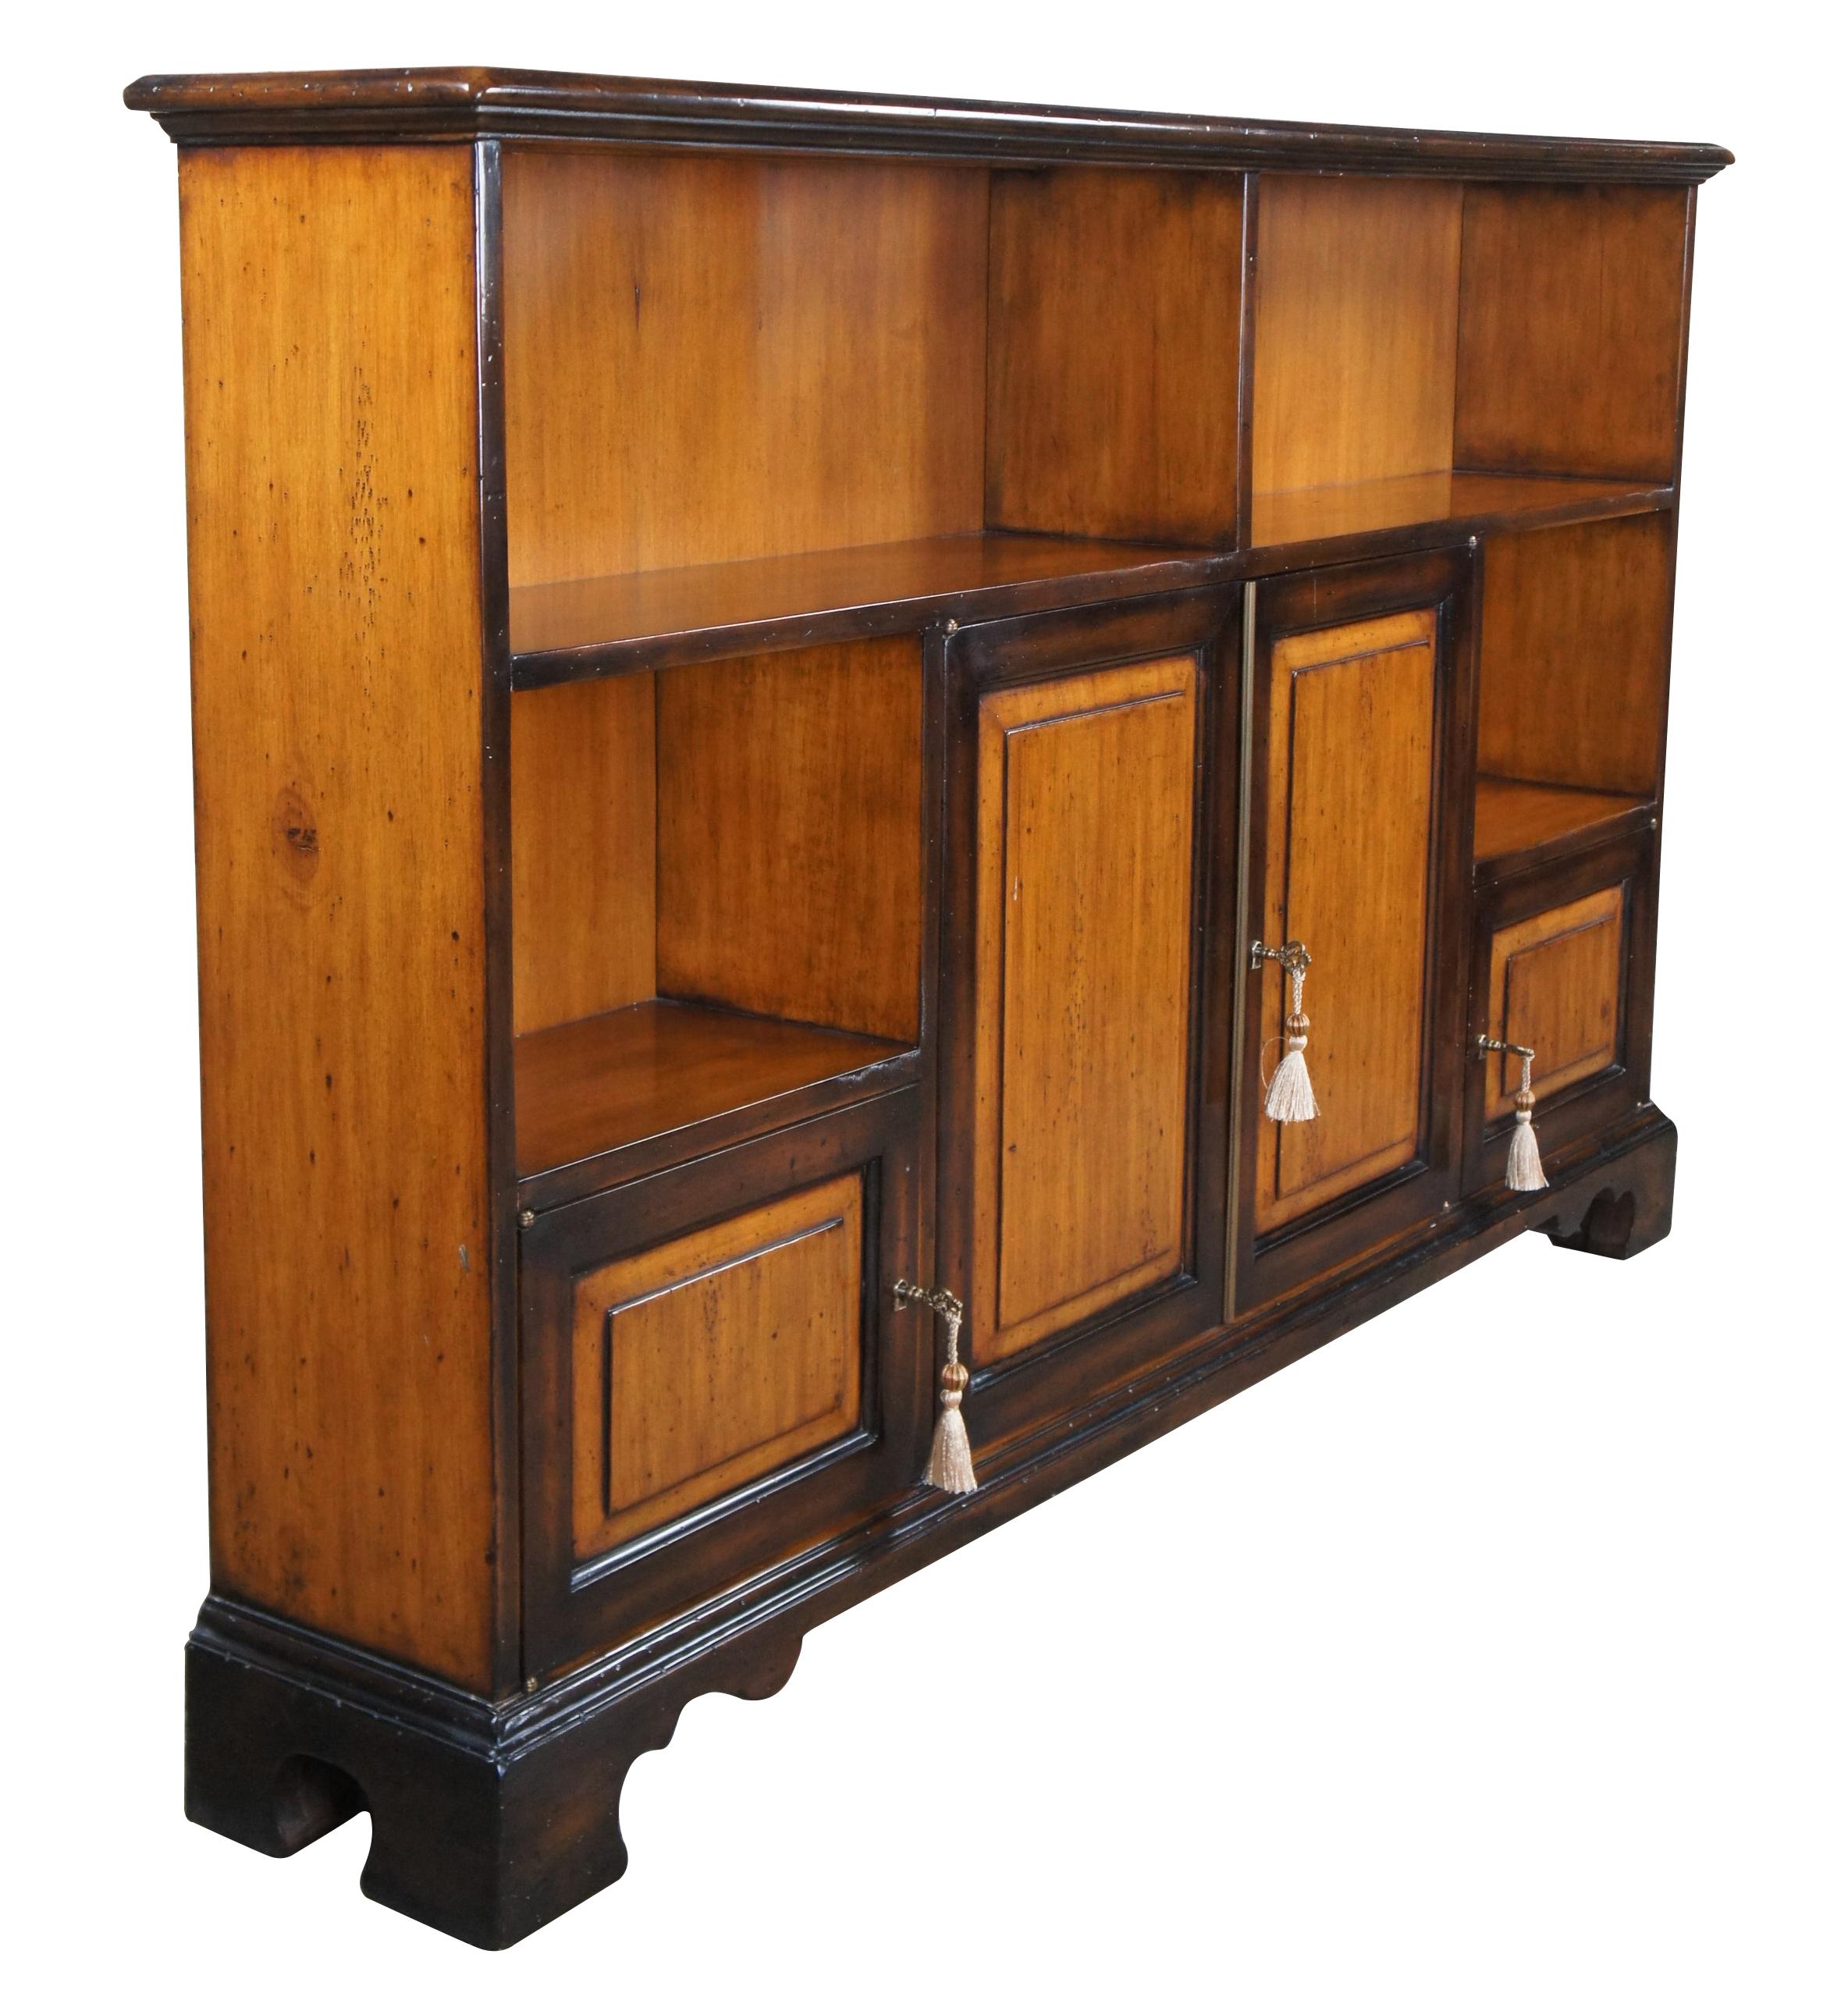 French Provincial Theodore Alexander Chateau Du Vallois Console Sideboard Bookcase Cabinet For Sale